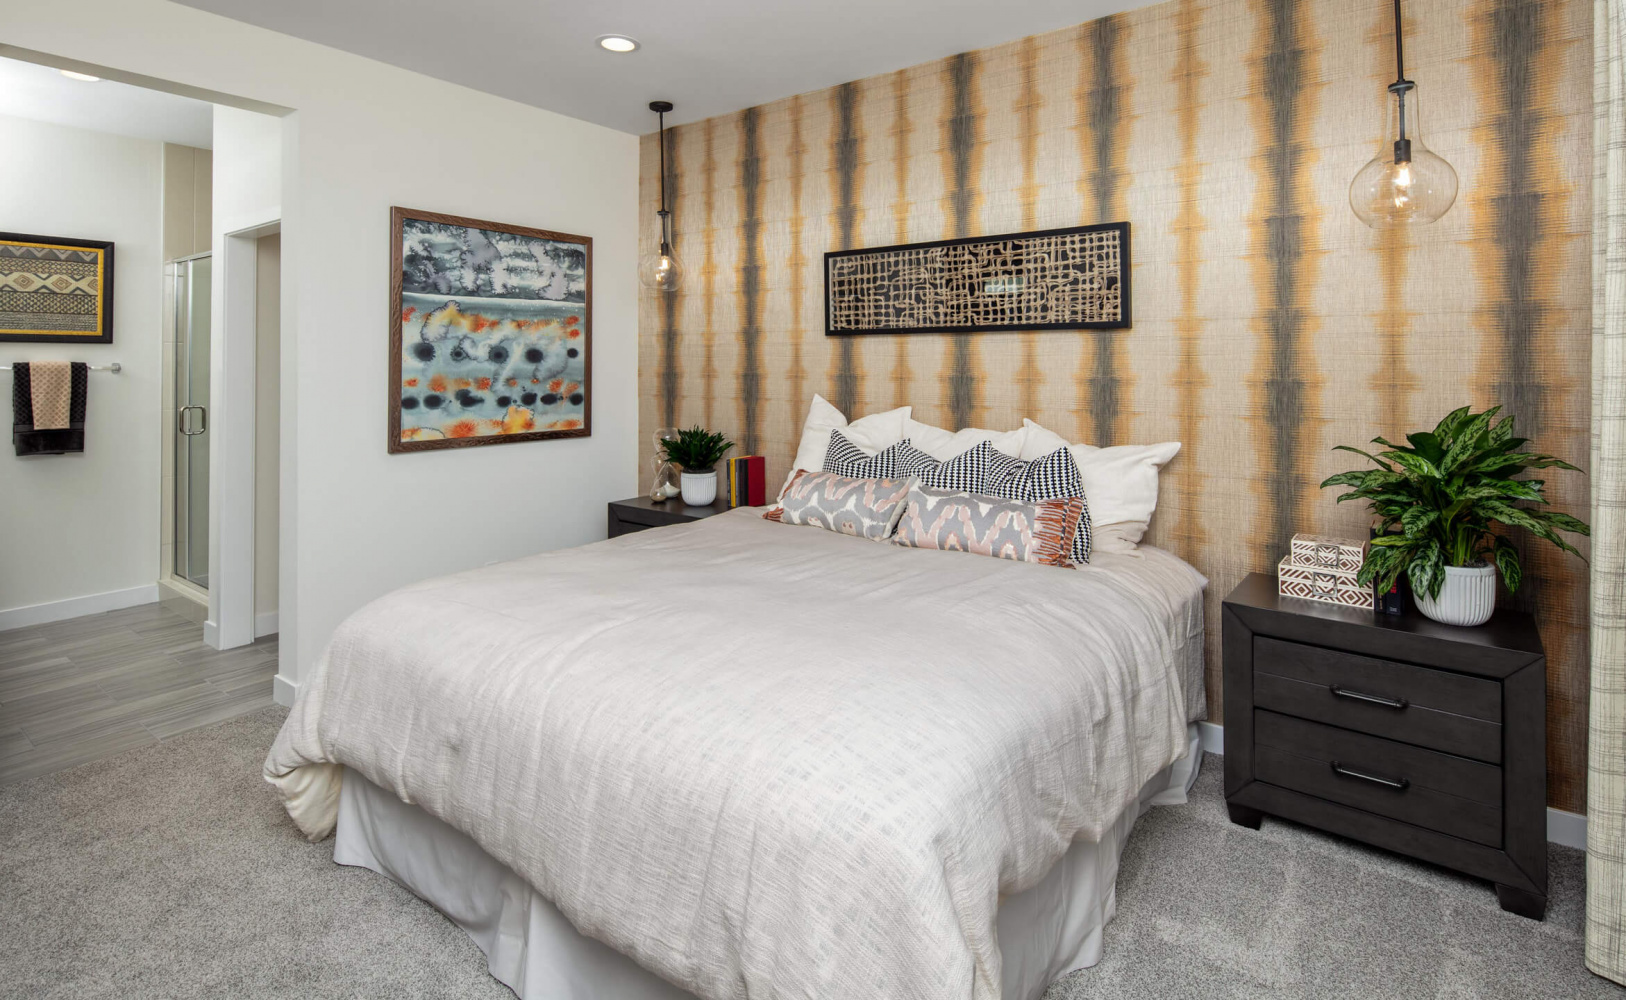 NewHeights-NewHomes-WestHills-Plan1-MasterBedroom